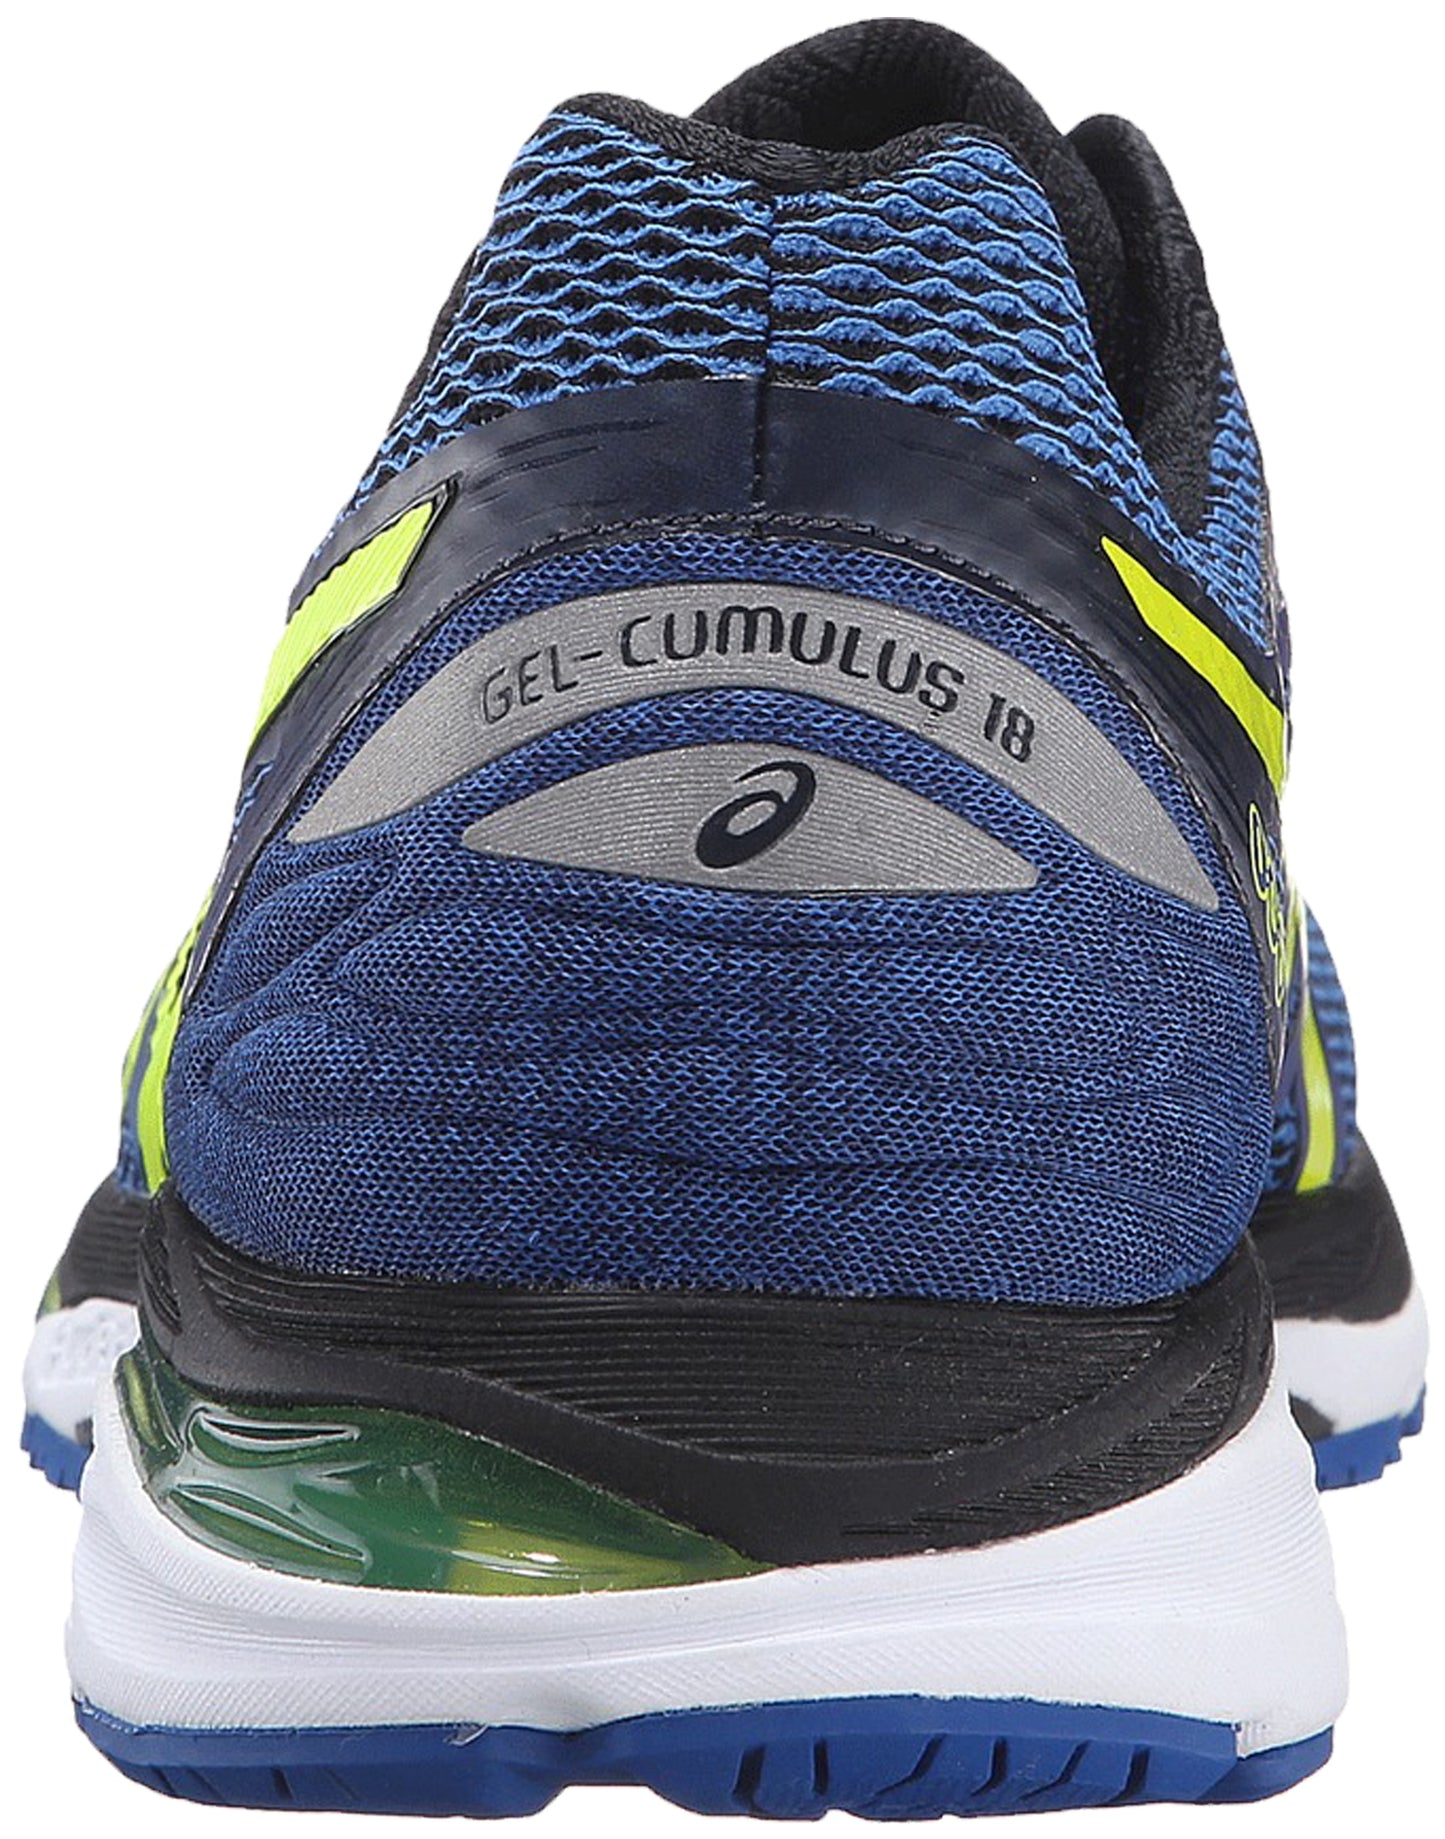 
                  
                    Back of Imperial Blue with Yellow and Black accents ASICS Men Walking Trail Cushioned Running Shoes Cumulus 18
                  
                